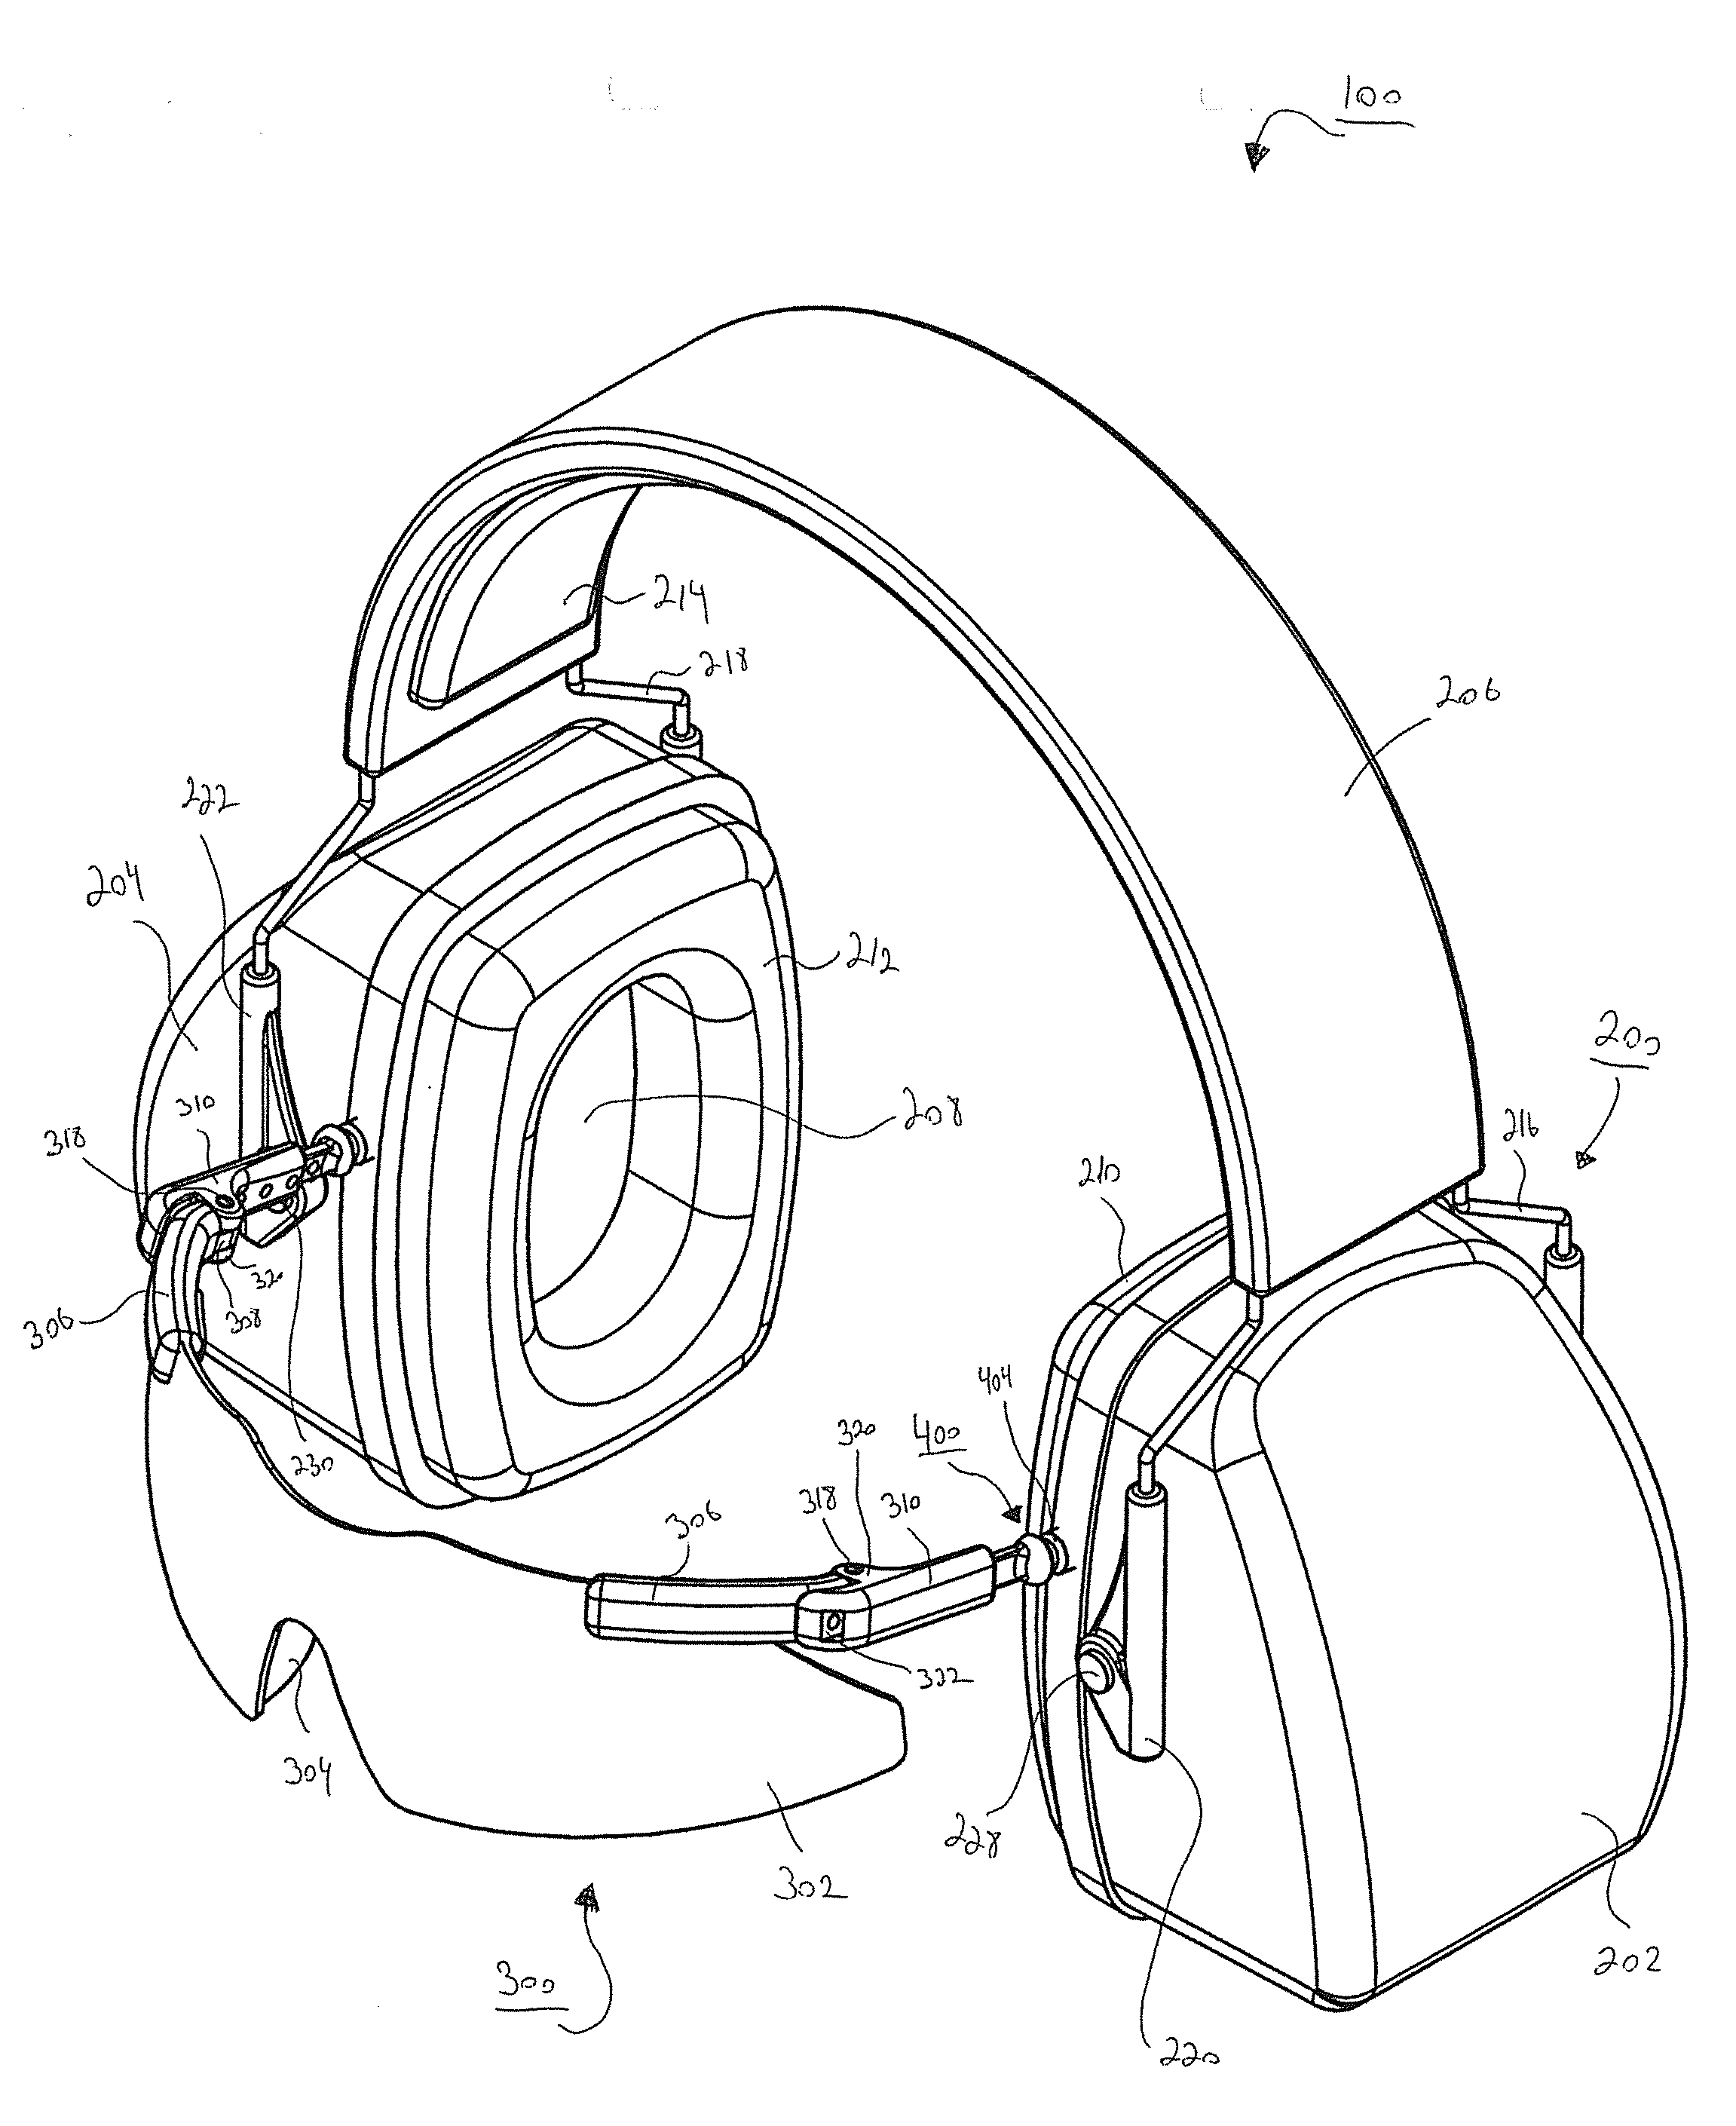 Combination ear and eye protection system and related method